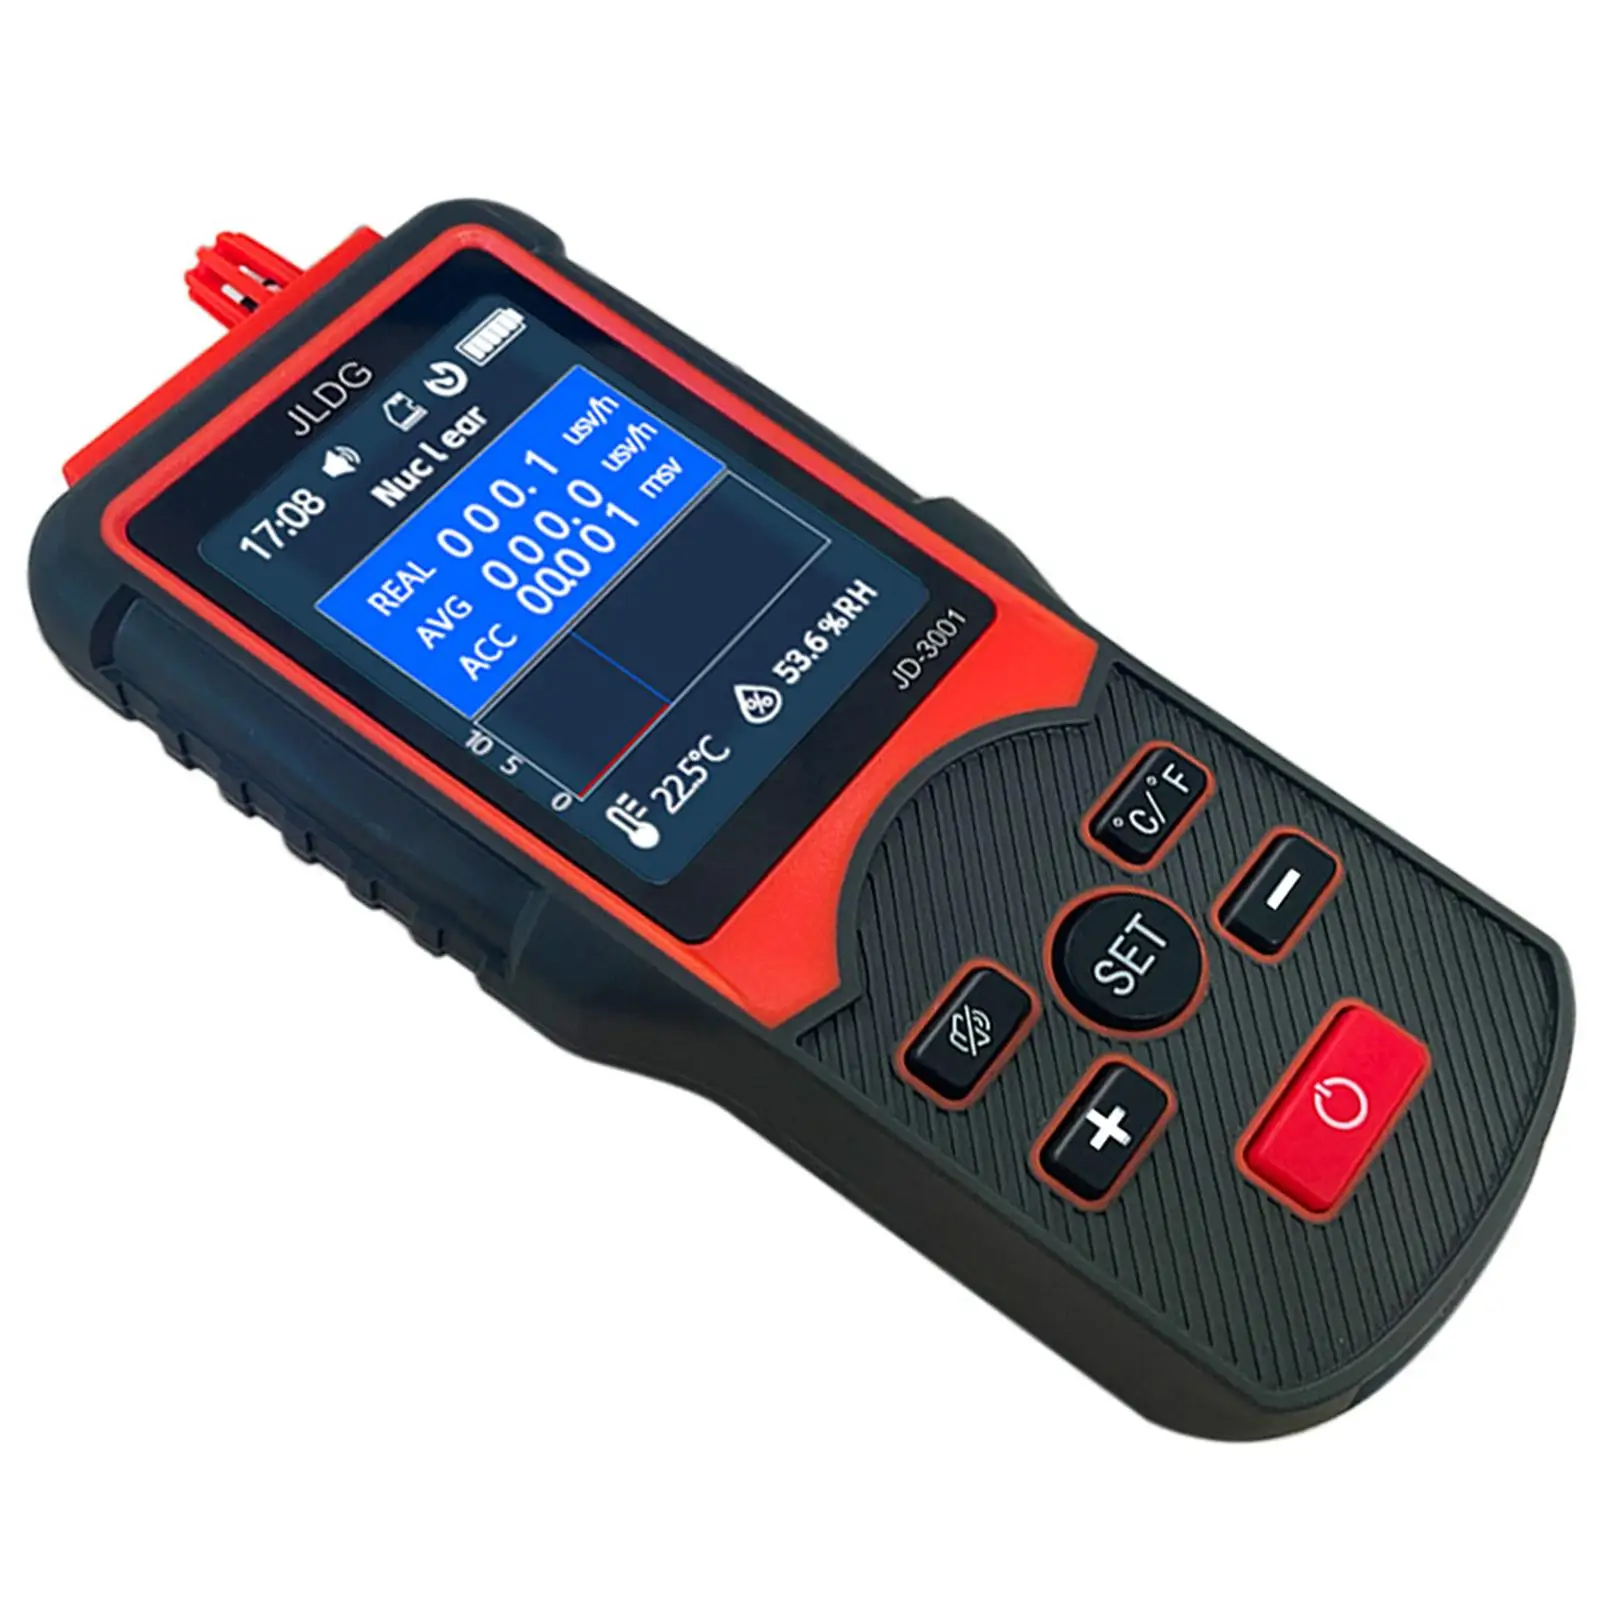 Tester Handheld High Sensitivity Nuclear Digital Meter for Personal Use Electromagnetic Field Industry Field